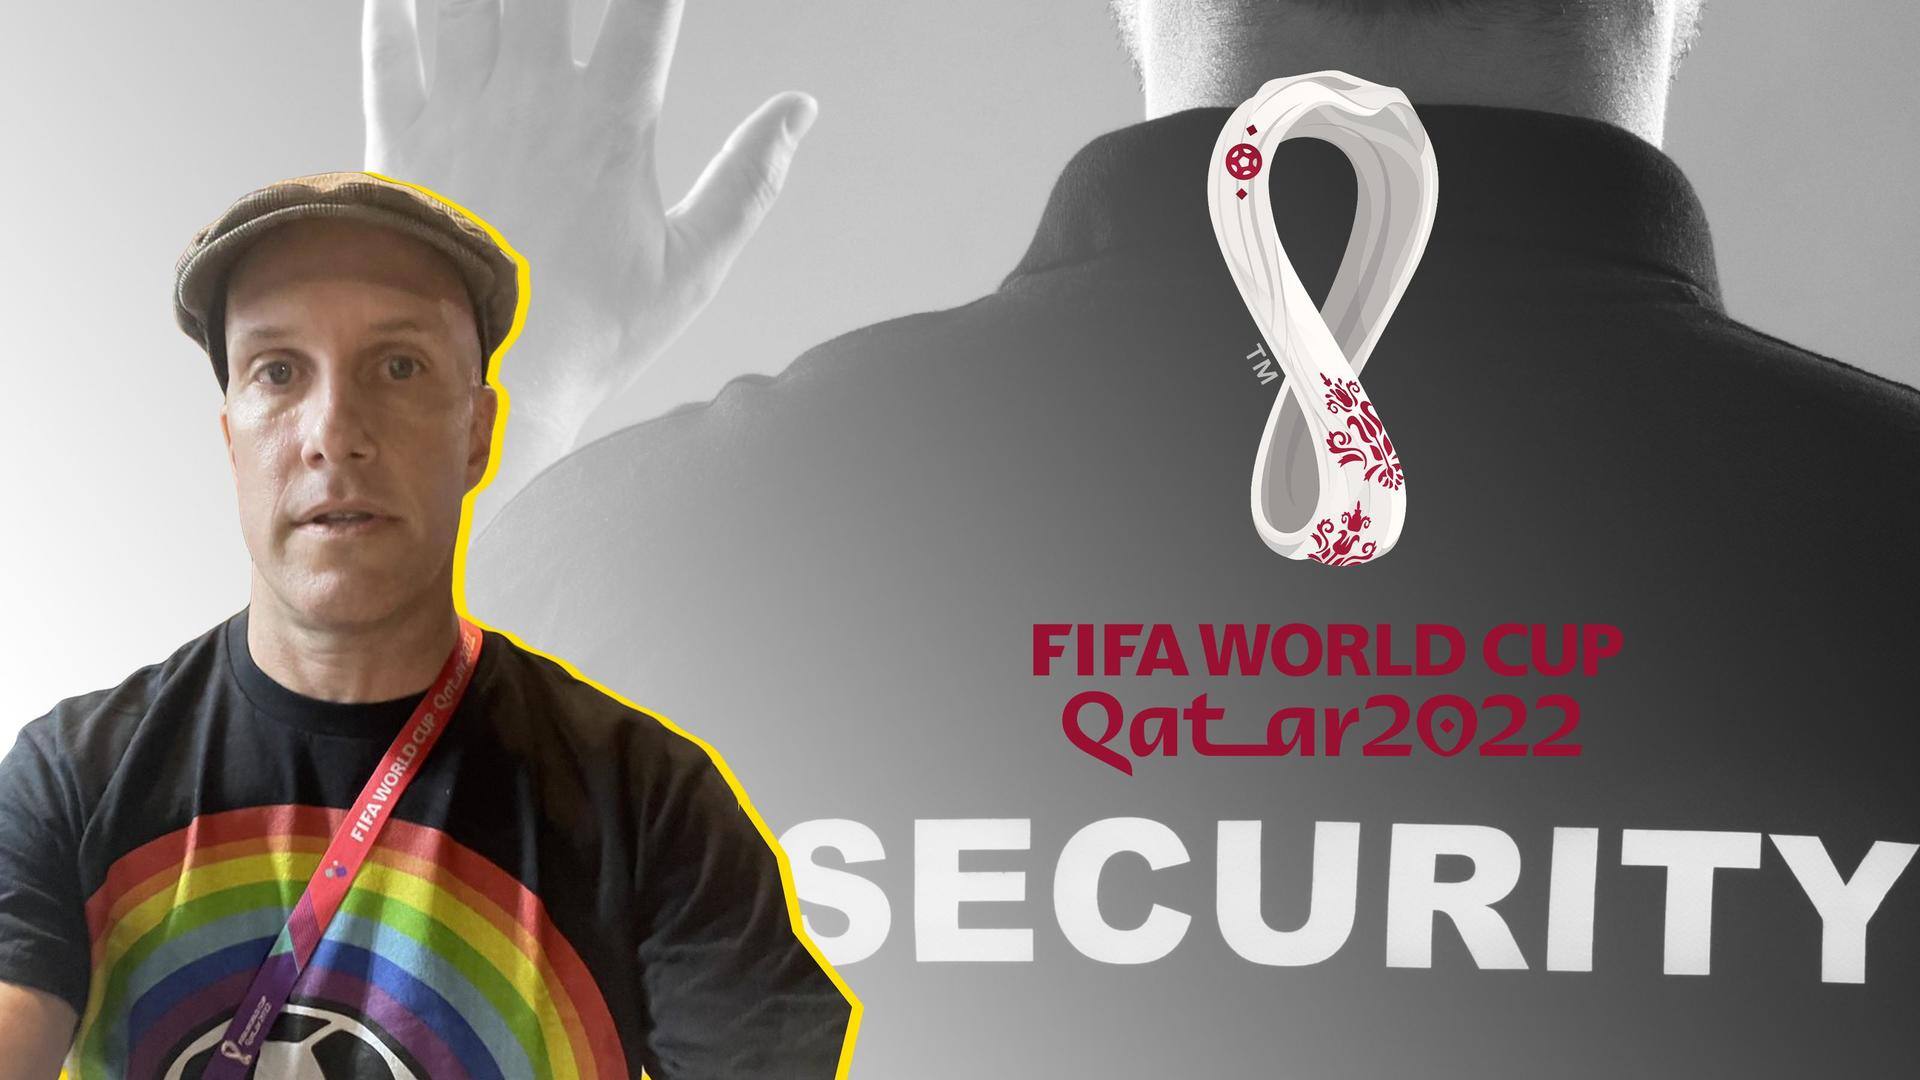 FIFA World Cup: US journalist detained for wearing rainbow t-shirt